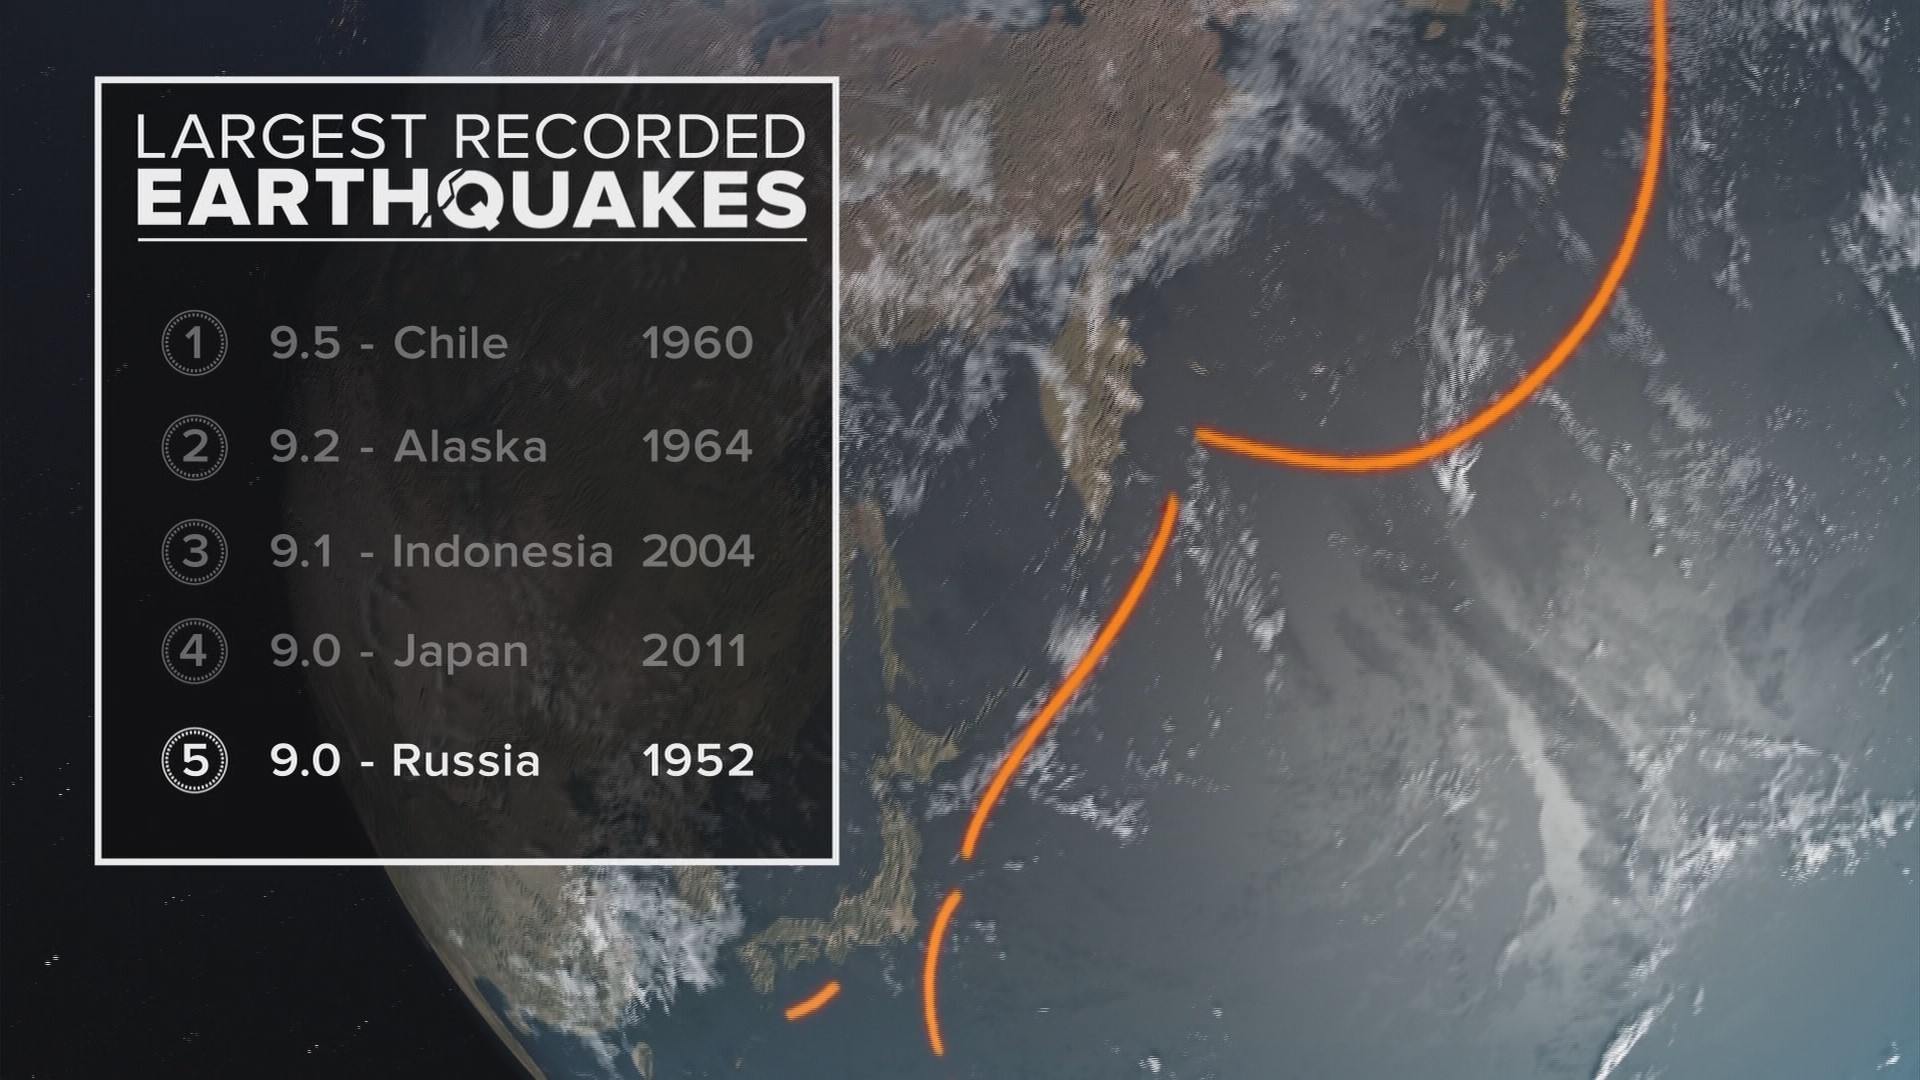 The five biggest earthquakes over the last 70 years were in eastern Russia (1952), Chile (1960), Alaska (1964), Indonesia (2004), and Japan (2011).